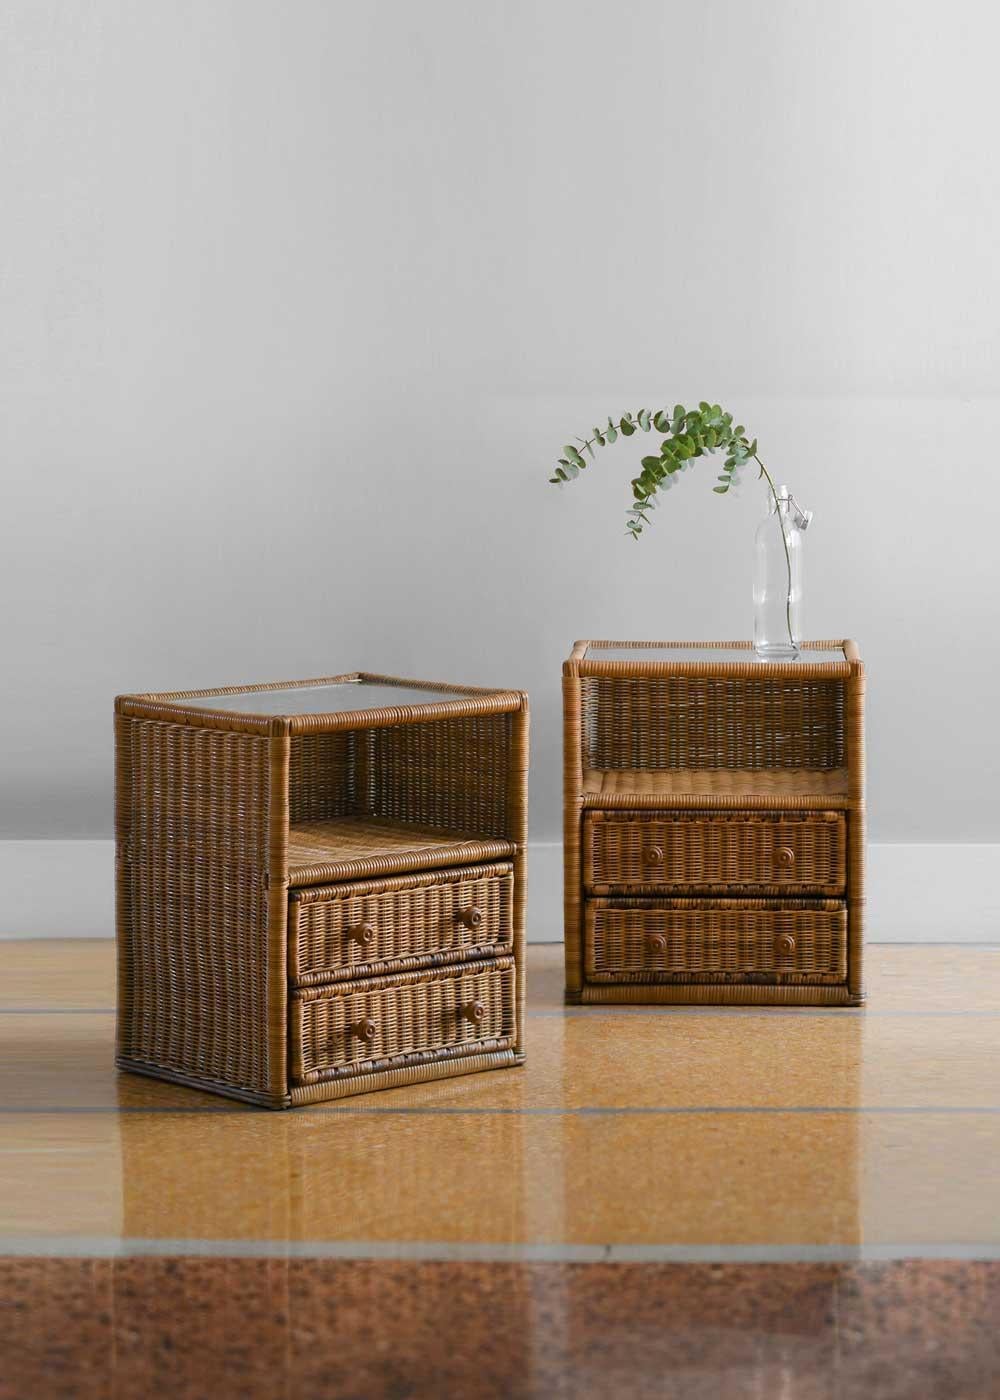 Pair of bamboo bedside tables produced by “Vivai del Sud” with drawers and glass top
PRODUCT DETAILS
Dimensions: 49w x 58h x 40d cm
Materials: bamboo, glass
Production: Italian manufacture 1980.